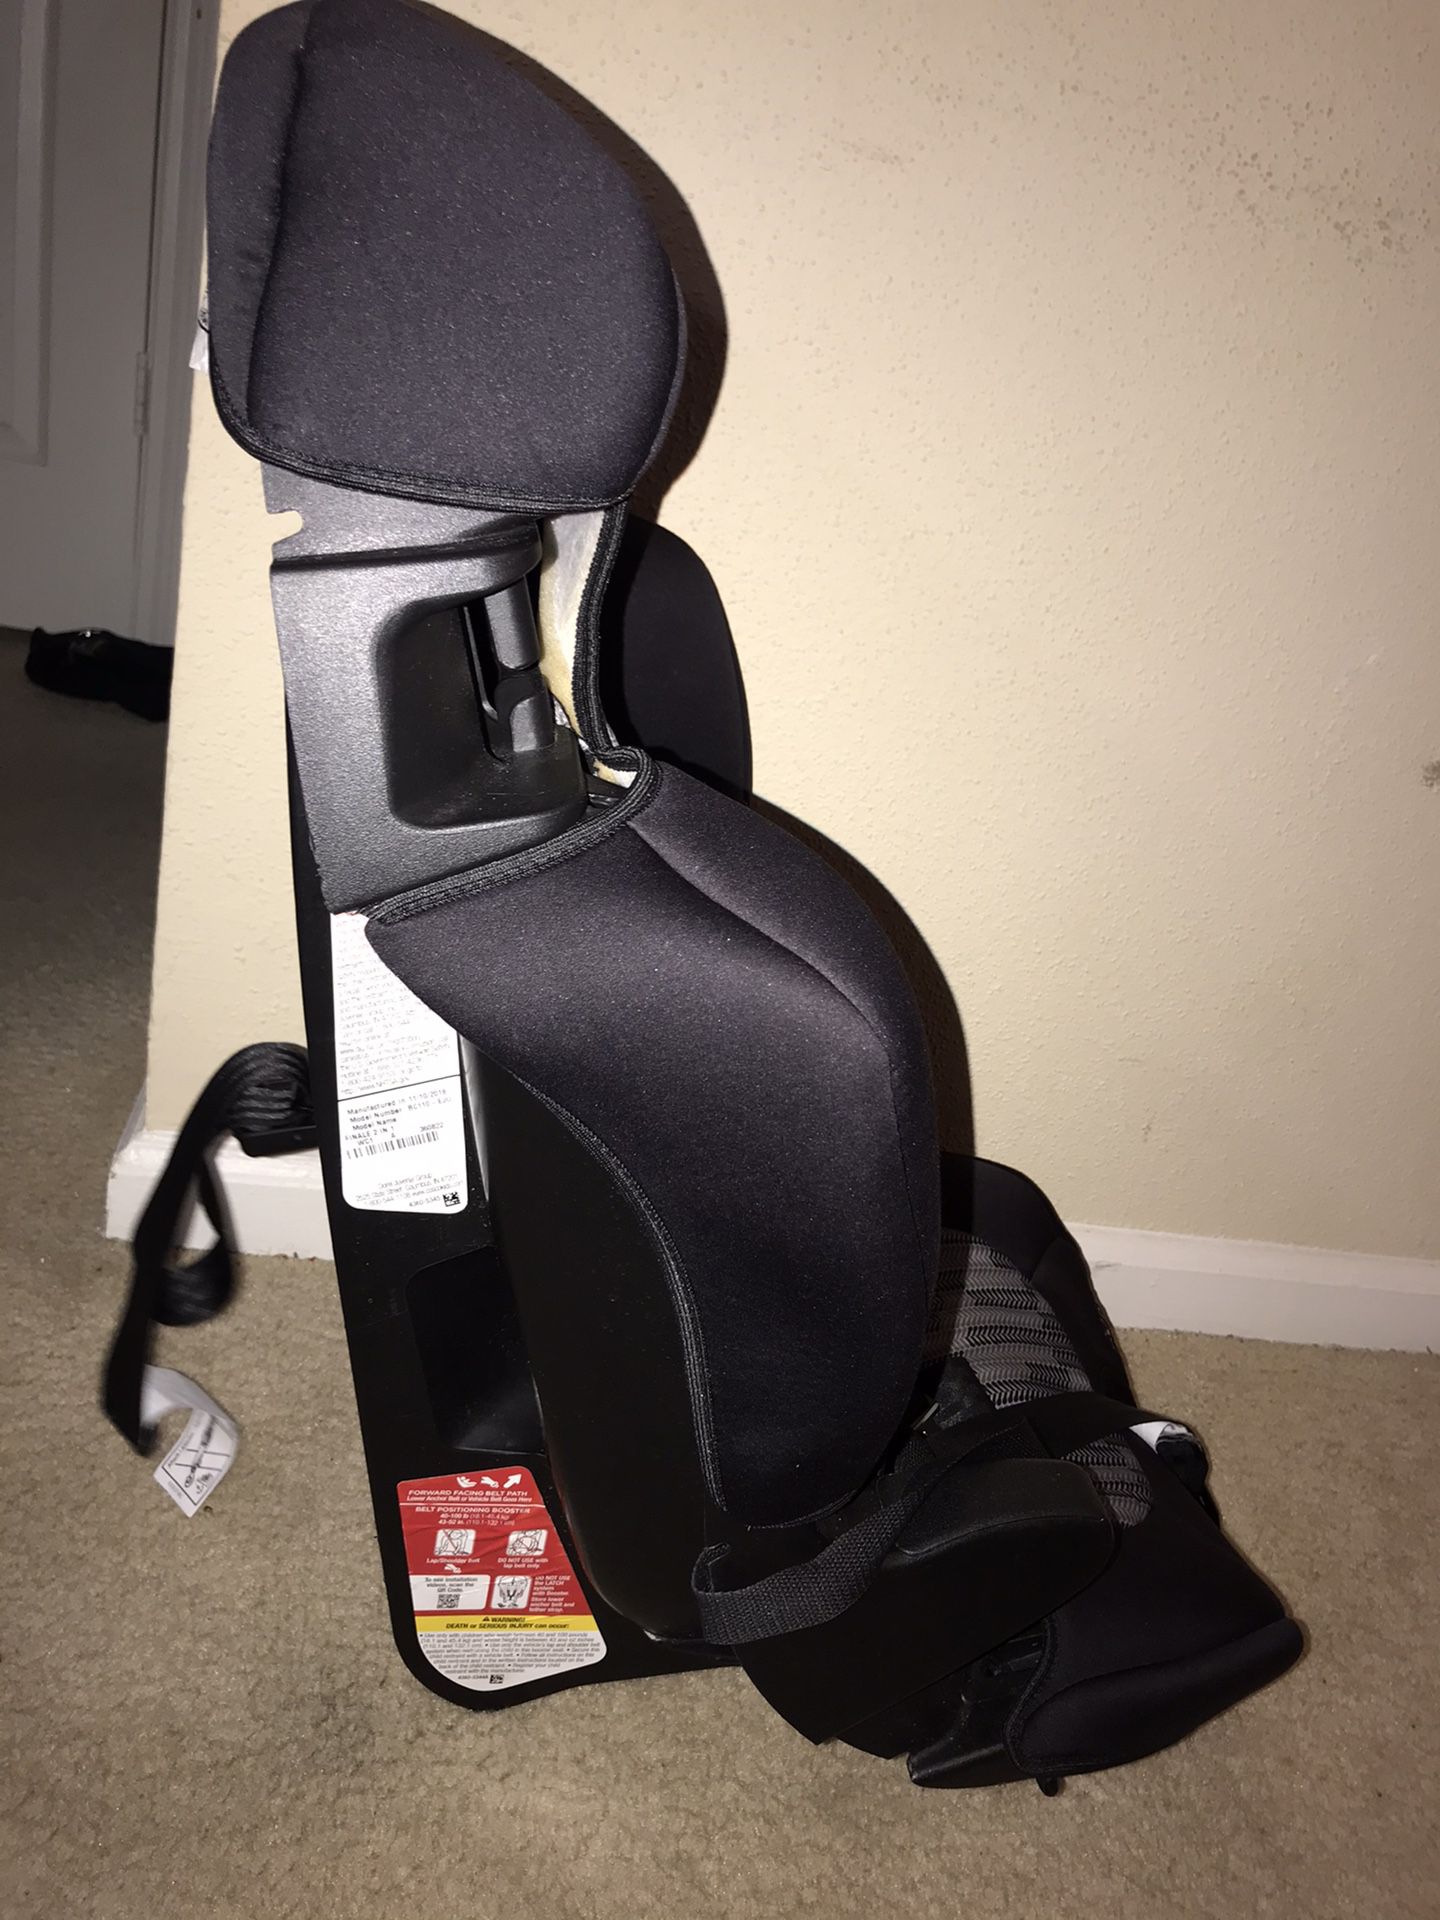 Baby booster seat car seat